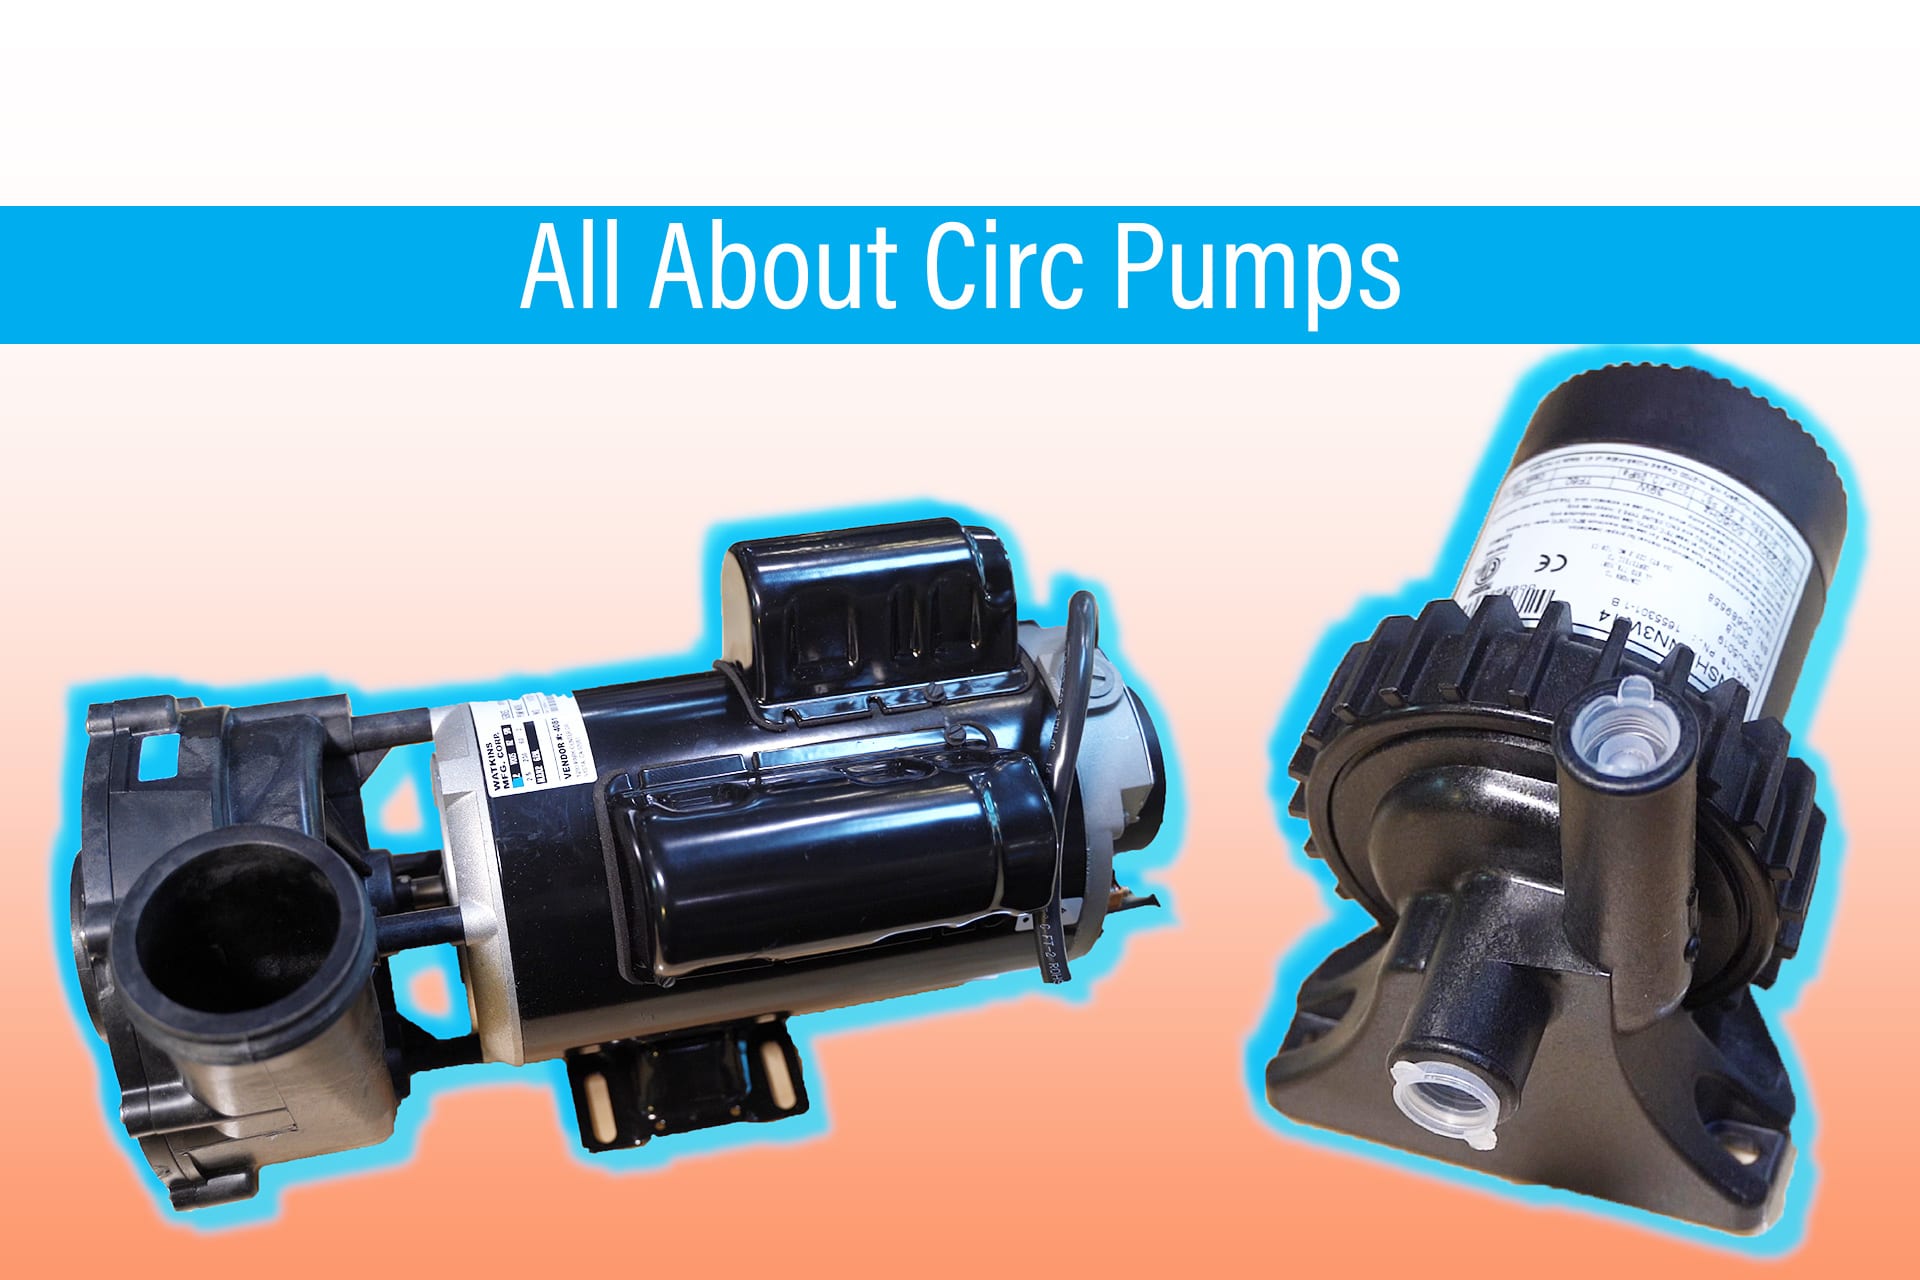 All About Circ Pumps